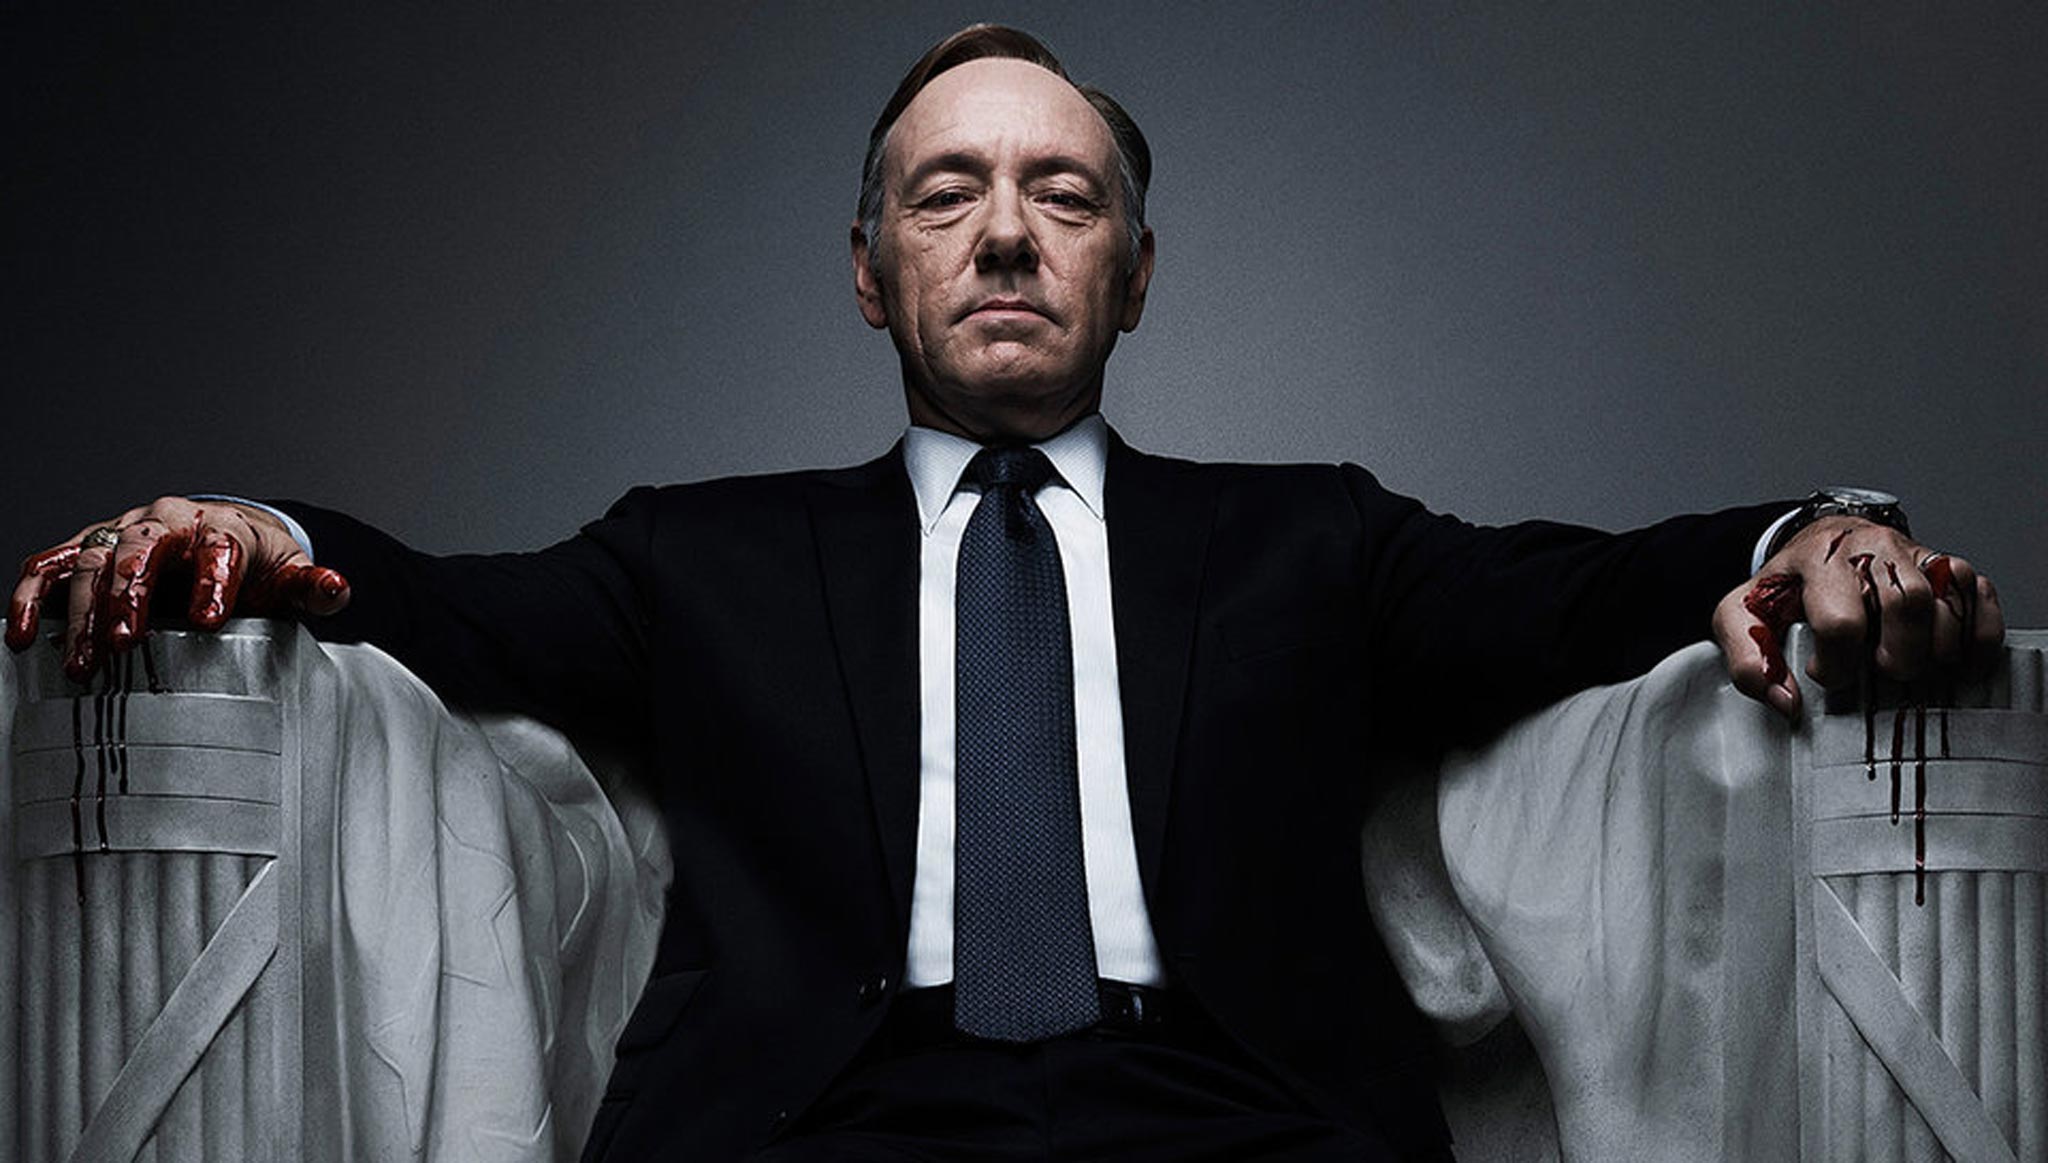 Kevin Spacey was dropped from Netflix hit House of Cards after the allegations were made